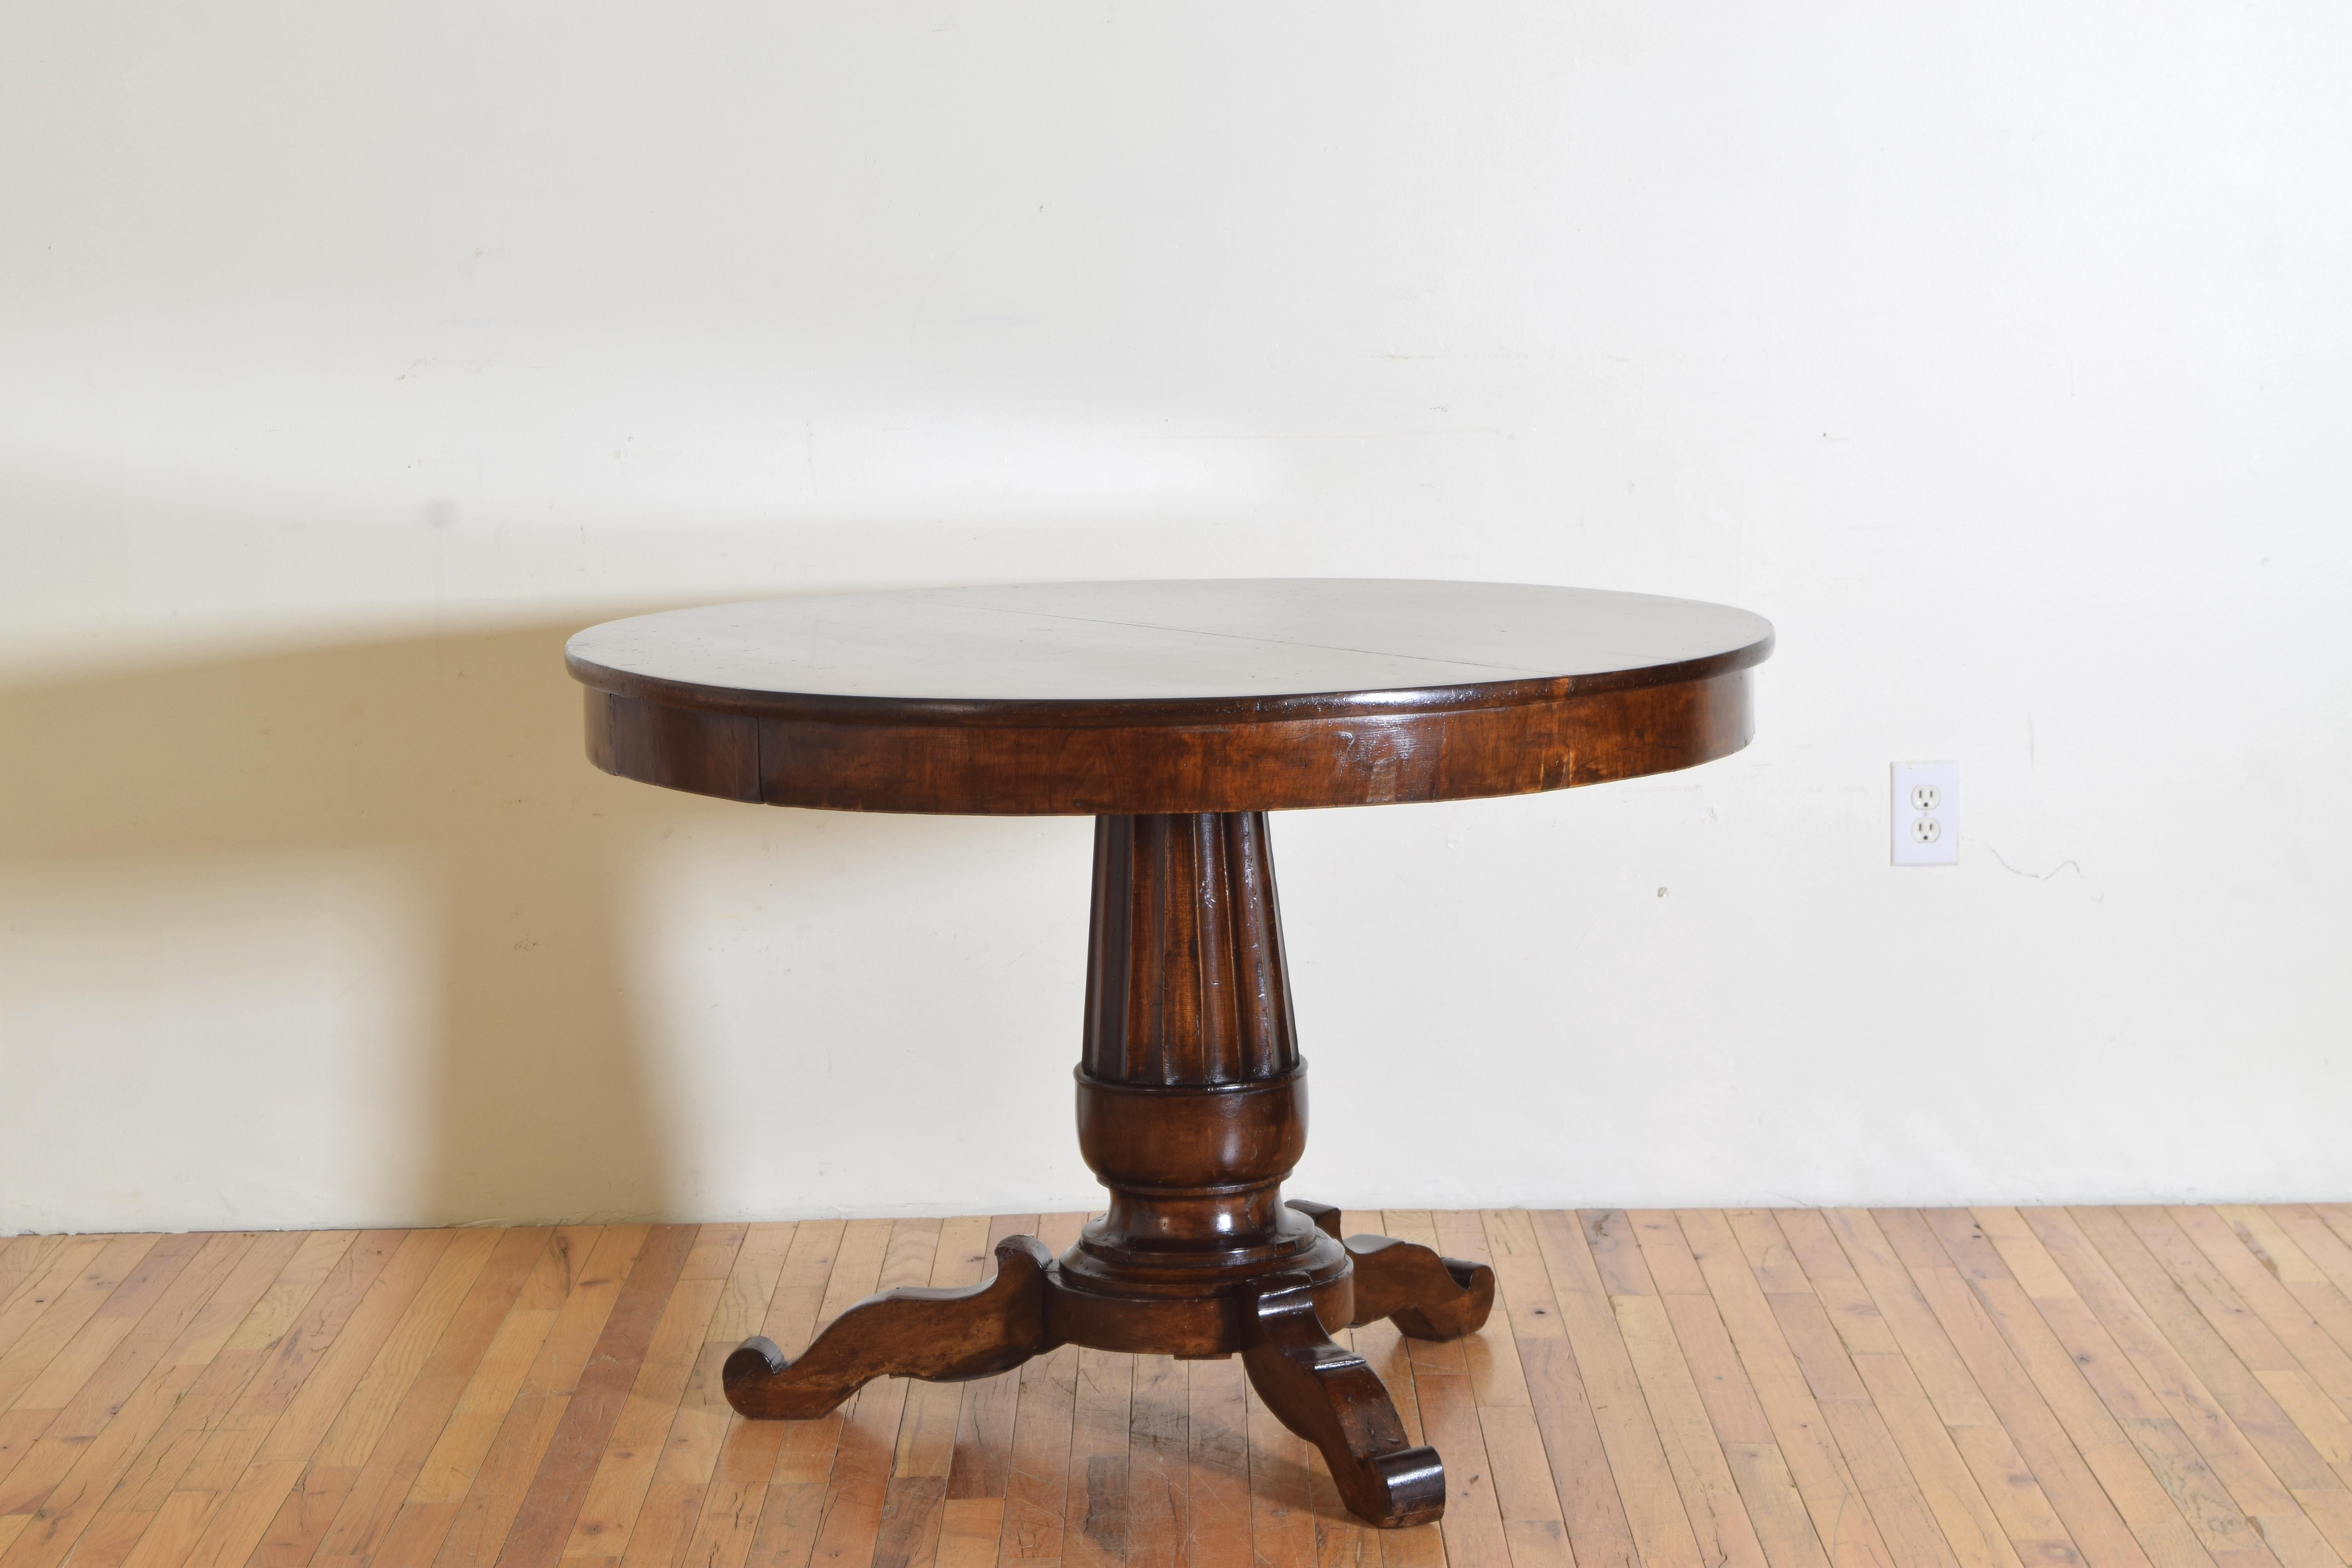 Having a circular solid walnut top resting upon an apron which is veneered and houses two opposing drawers, the top is raised on a tapering fluted column terminating in a stepped tripartite base issuing three shaped legs with upturned feet.